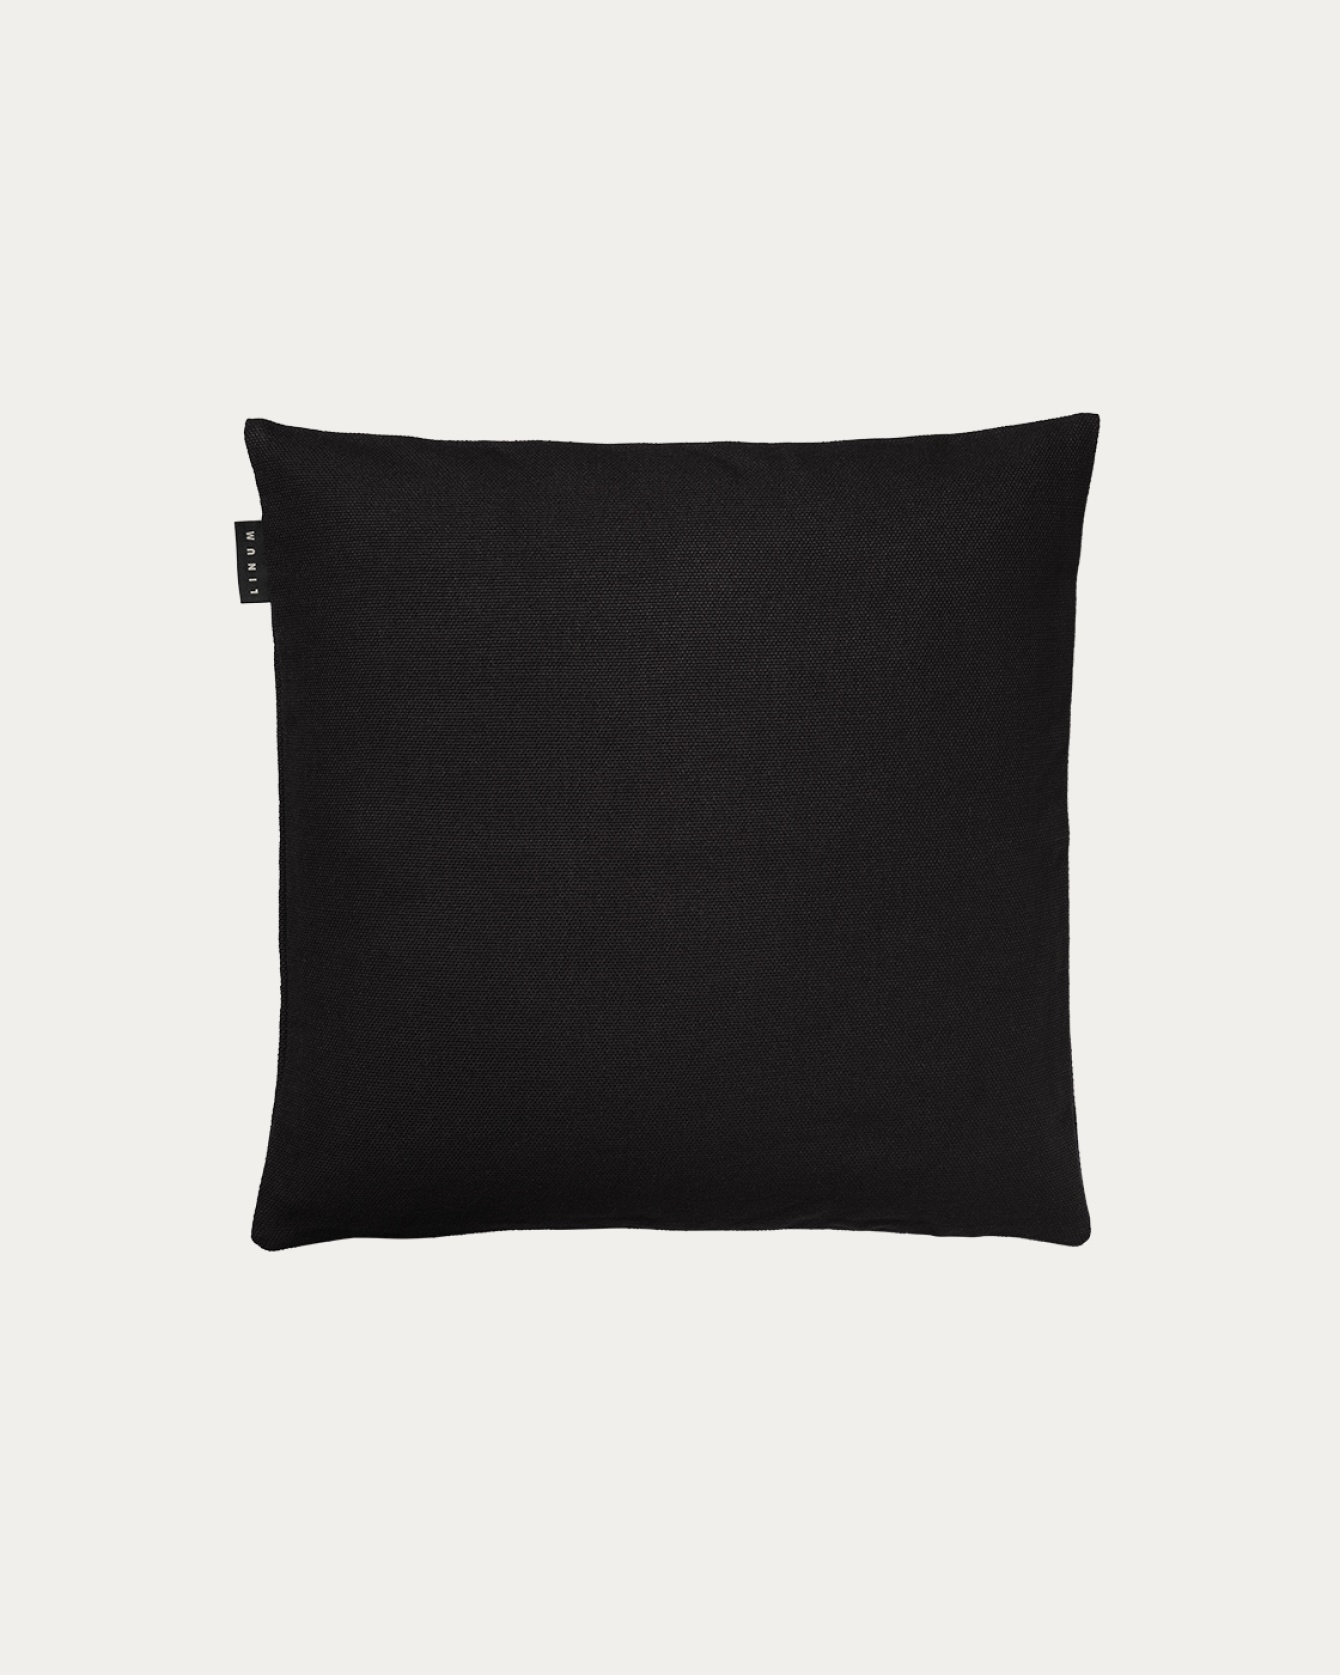 Product image black PEPPER cushion cover made of soft cotton from LINUM DESIGN. Easy to wash and durable for generations. Size 40x40 cm.